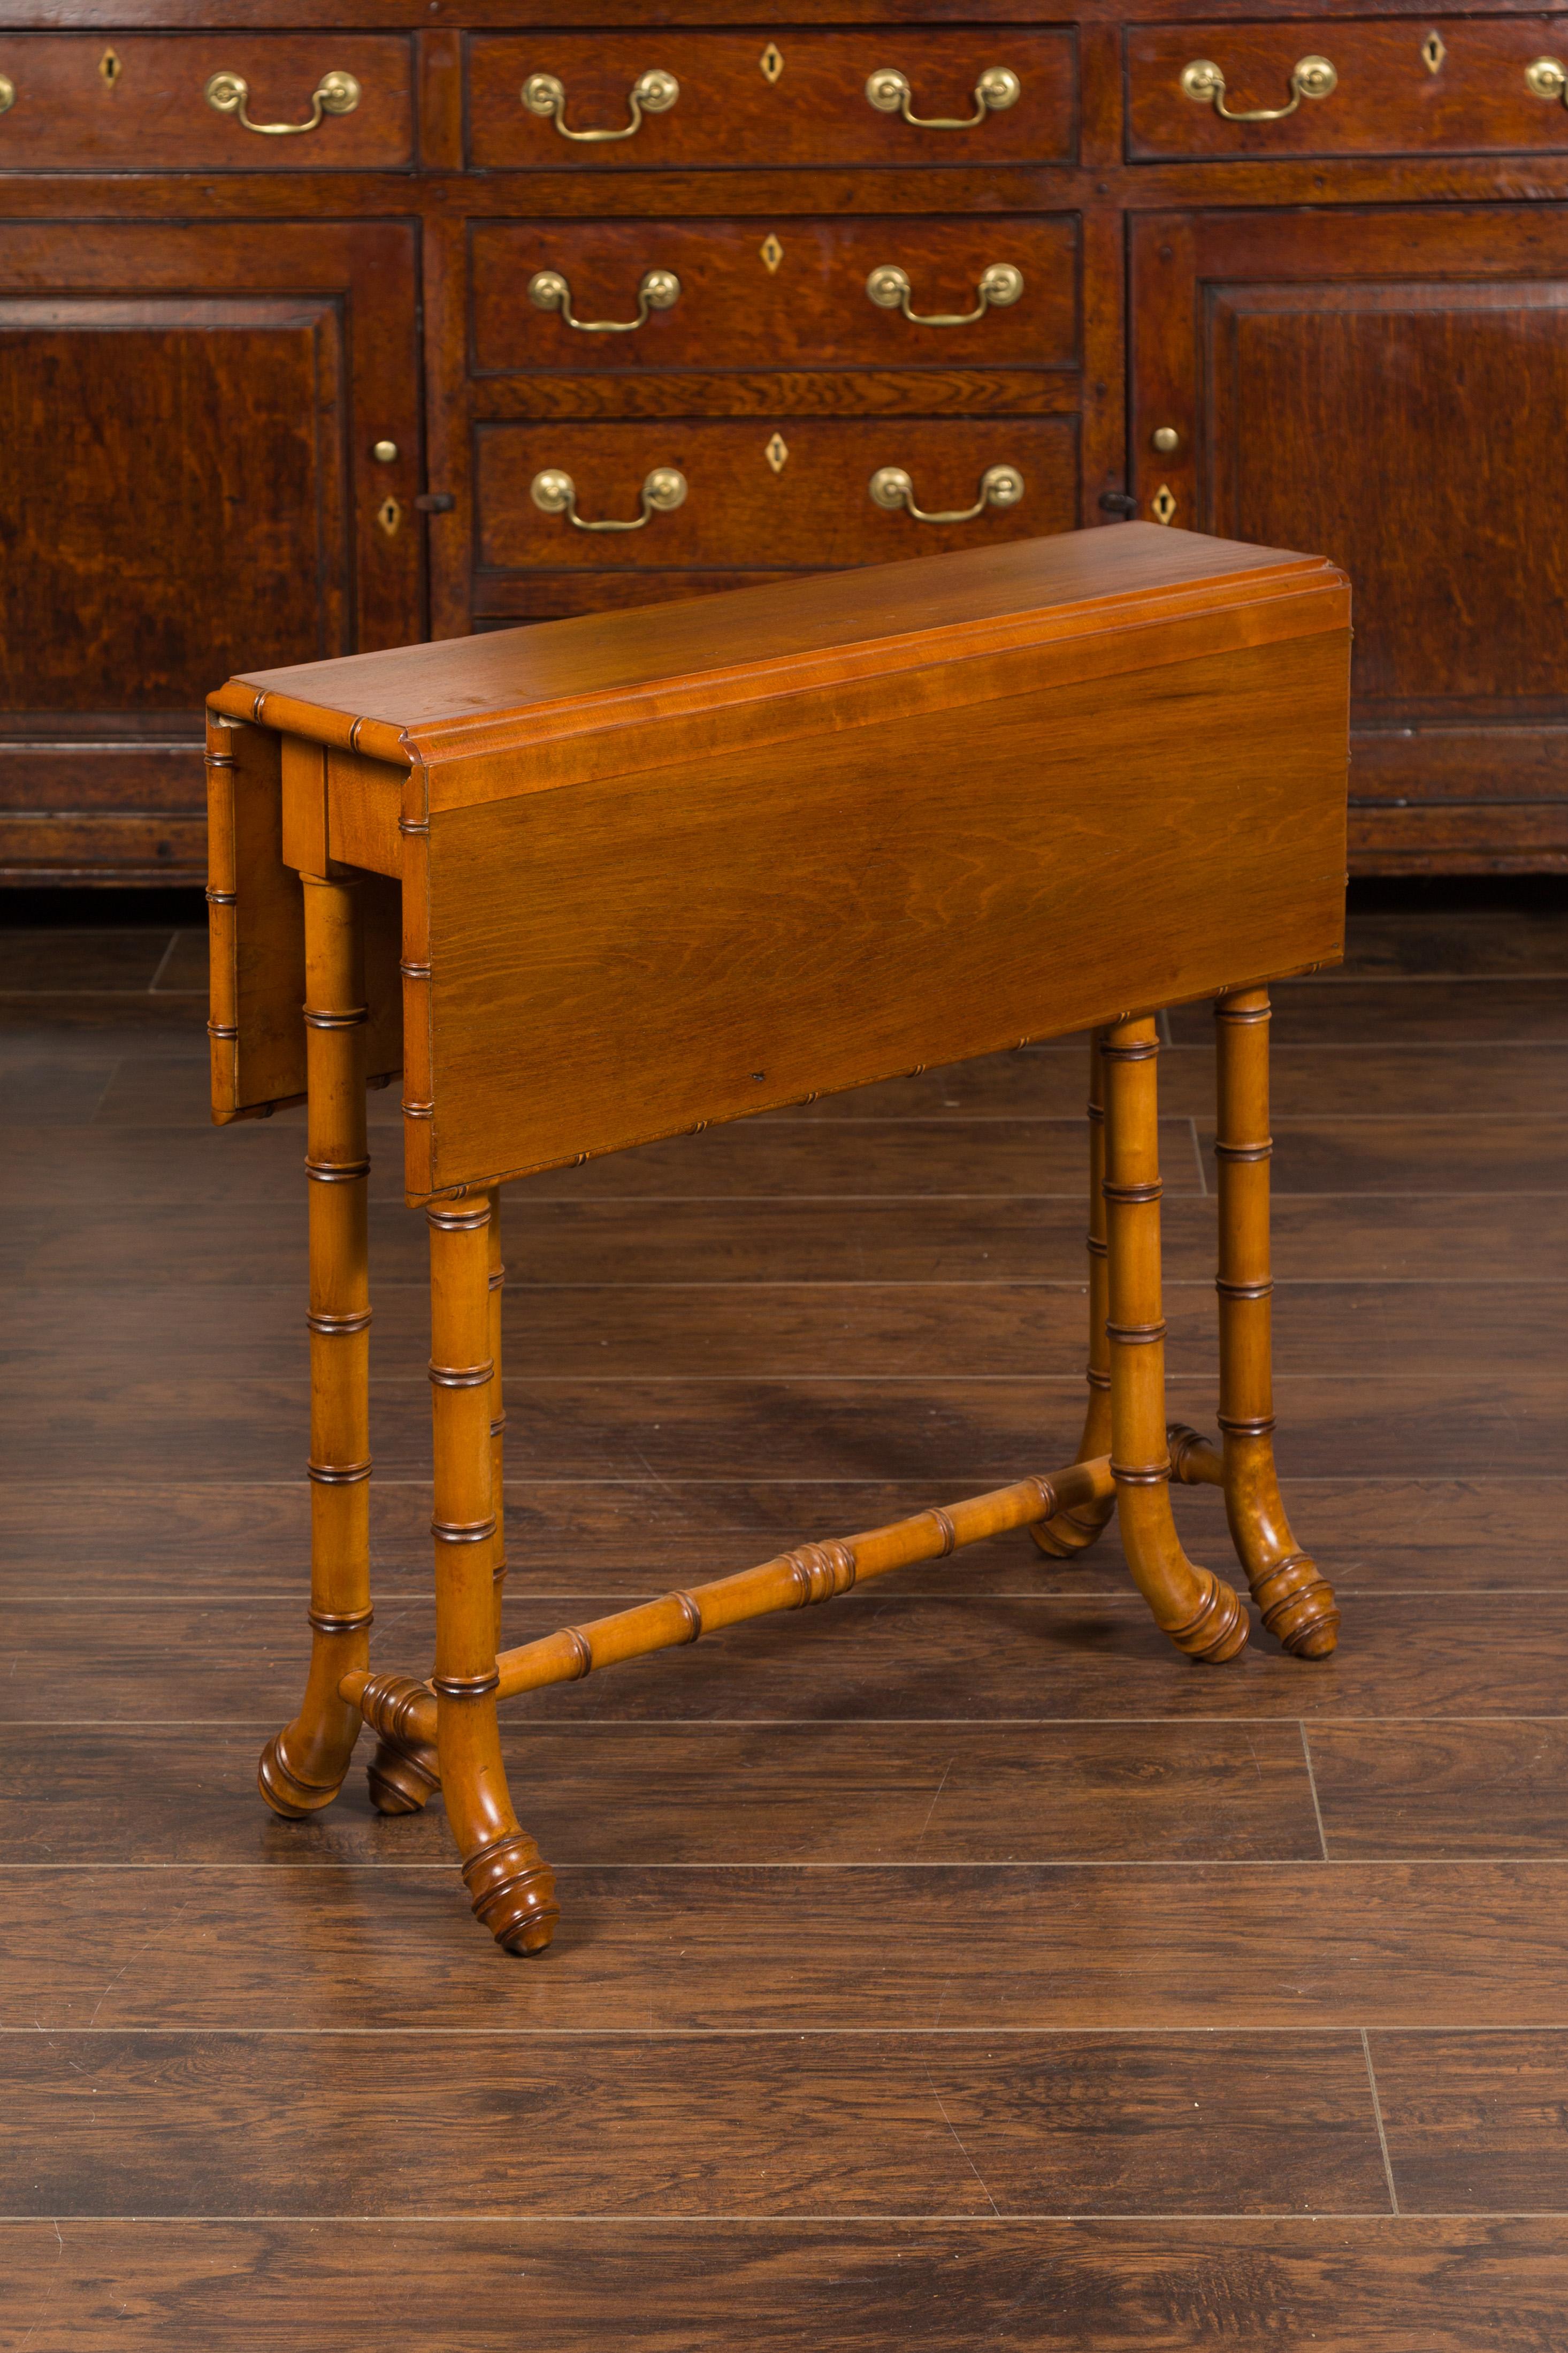 An English walnut drop-leaf table from the early 20th century, with faux-bamboo base. Created in England during the early years of the 20th century, this walnut table features a nearly square top presenting two drop leaves resting on swivel legs